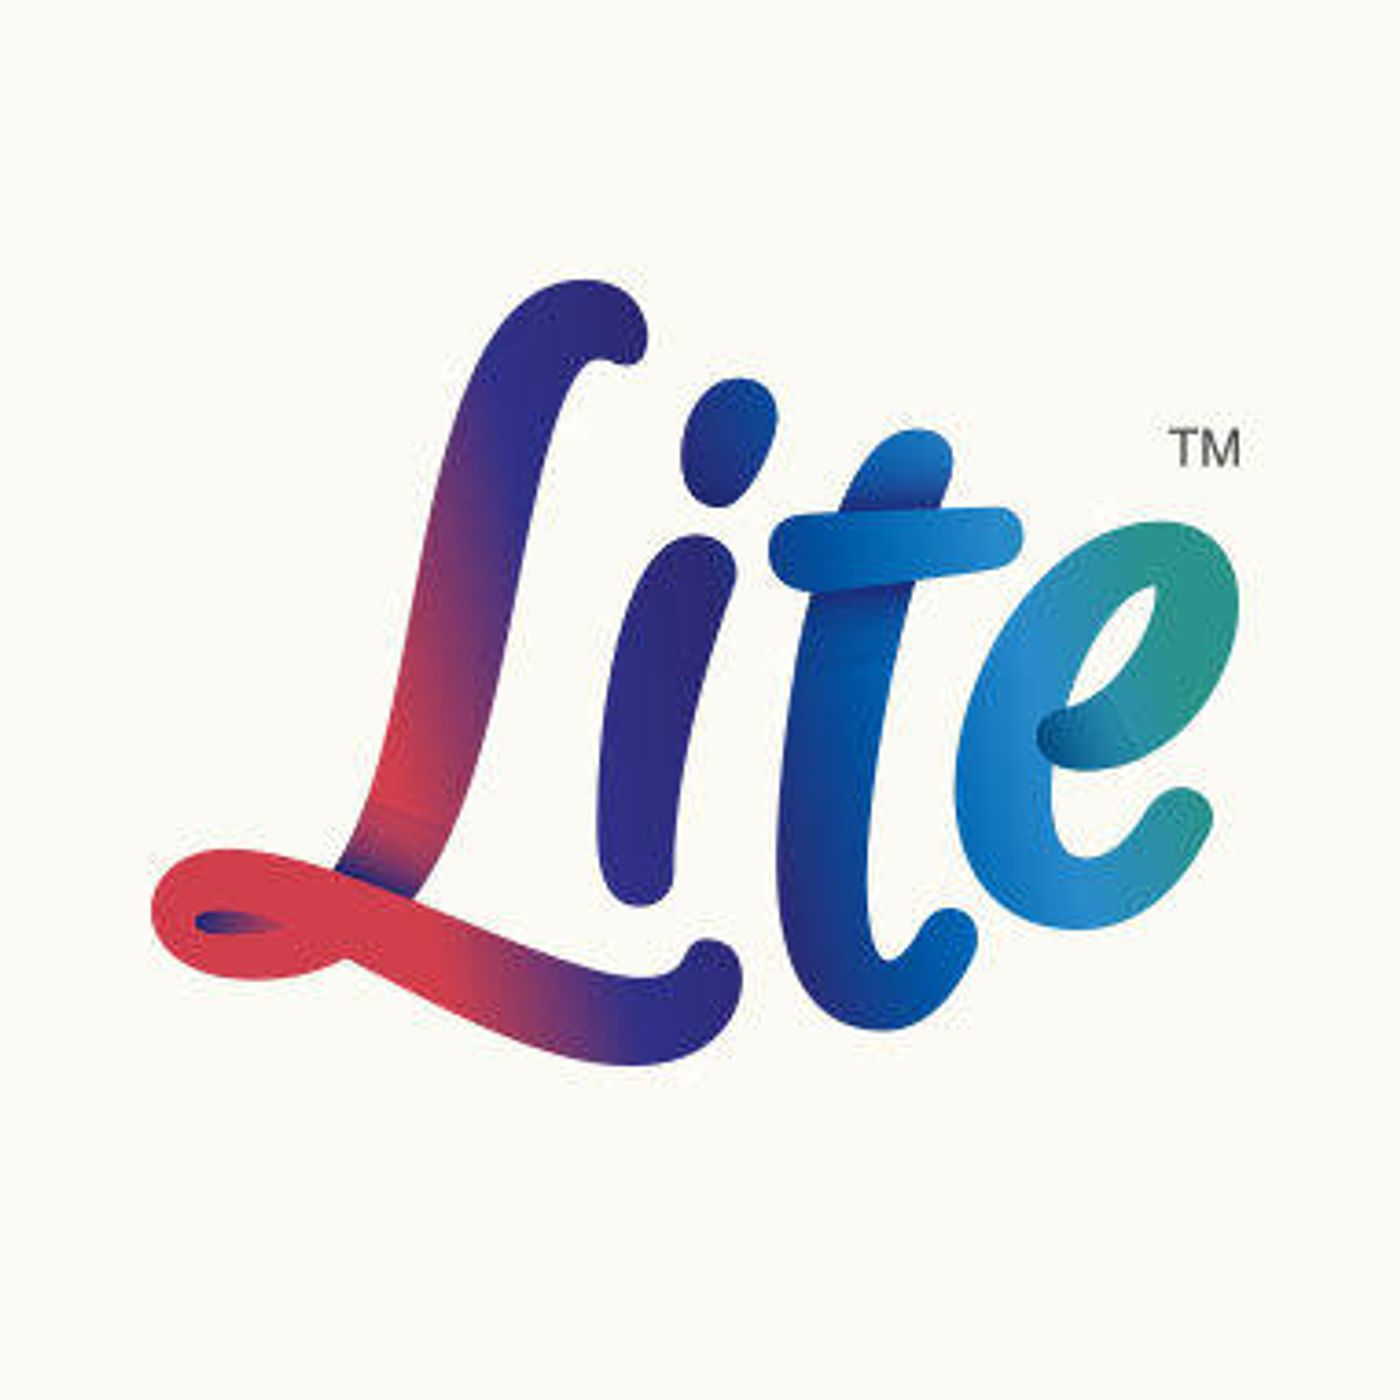 547: Lite Frontpage with Annabelle Lee and Rajan Moses